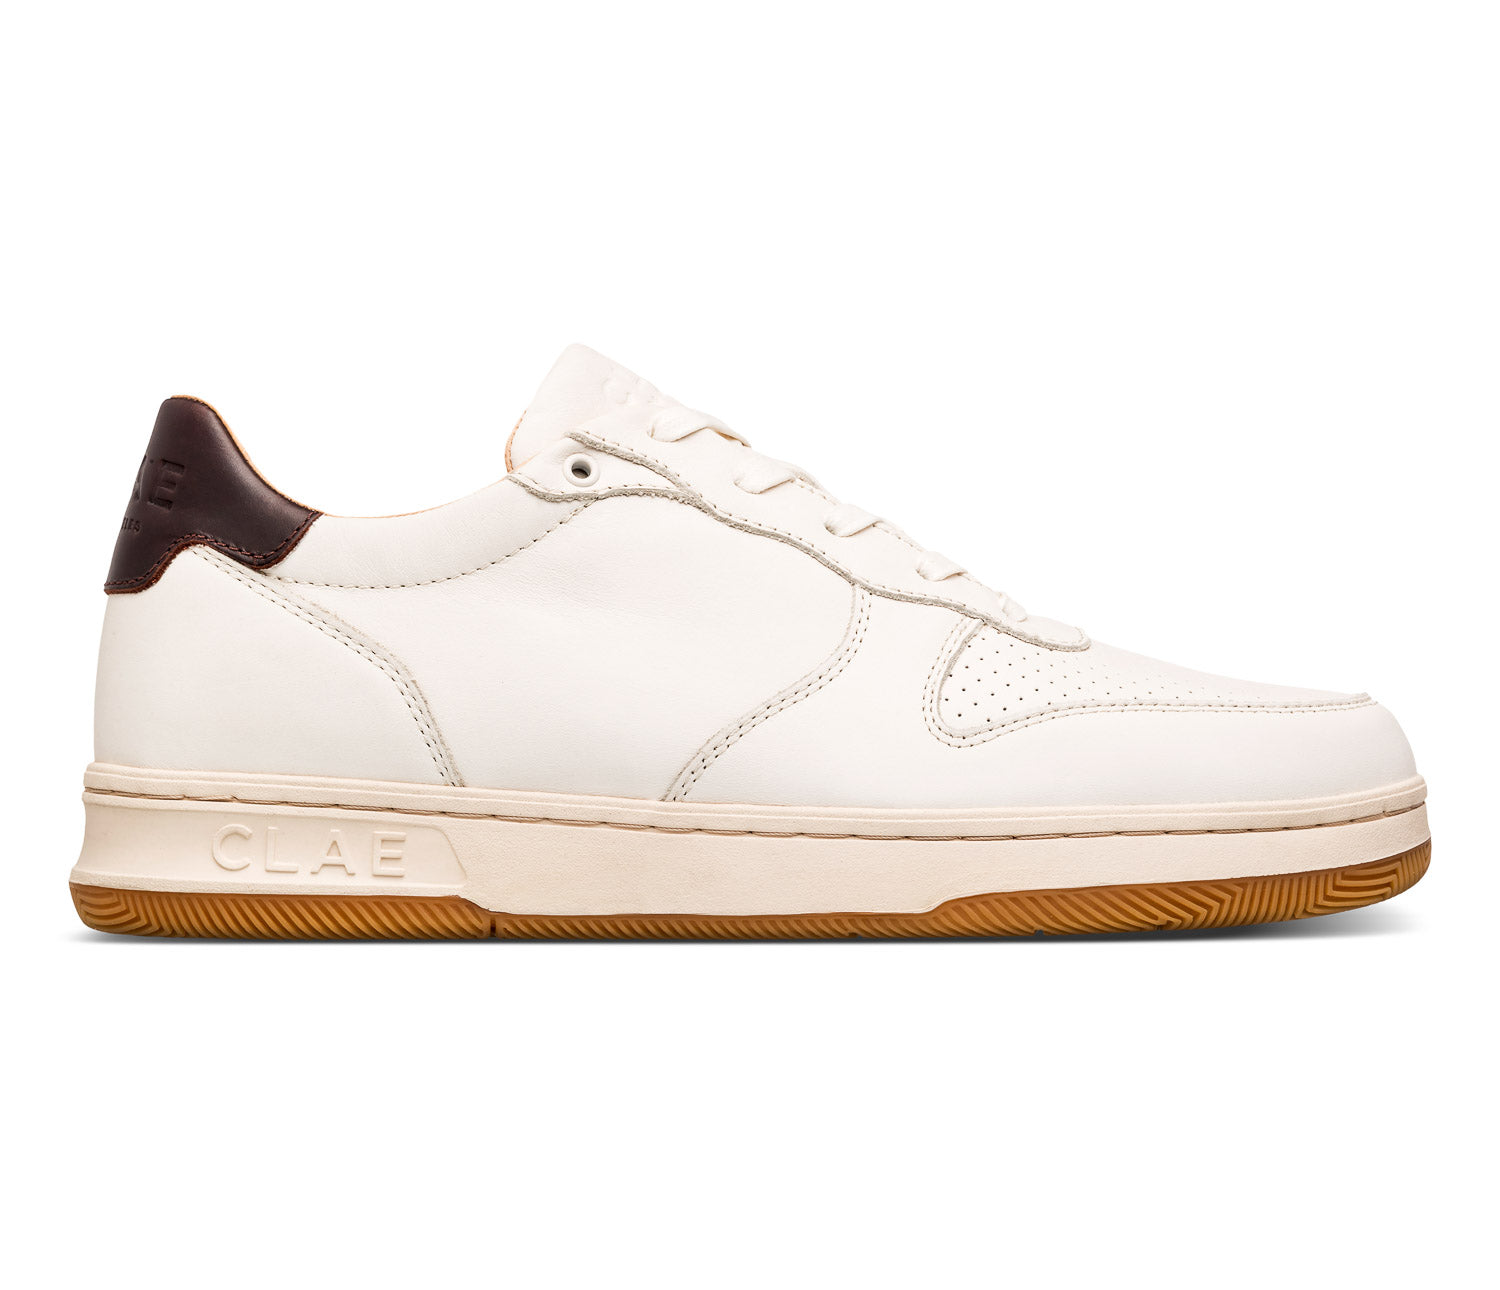 Clae Malone Off-White, Sneakers Homme, Clae